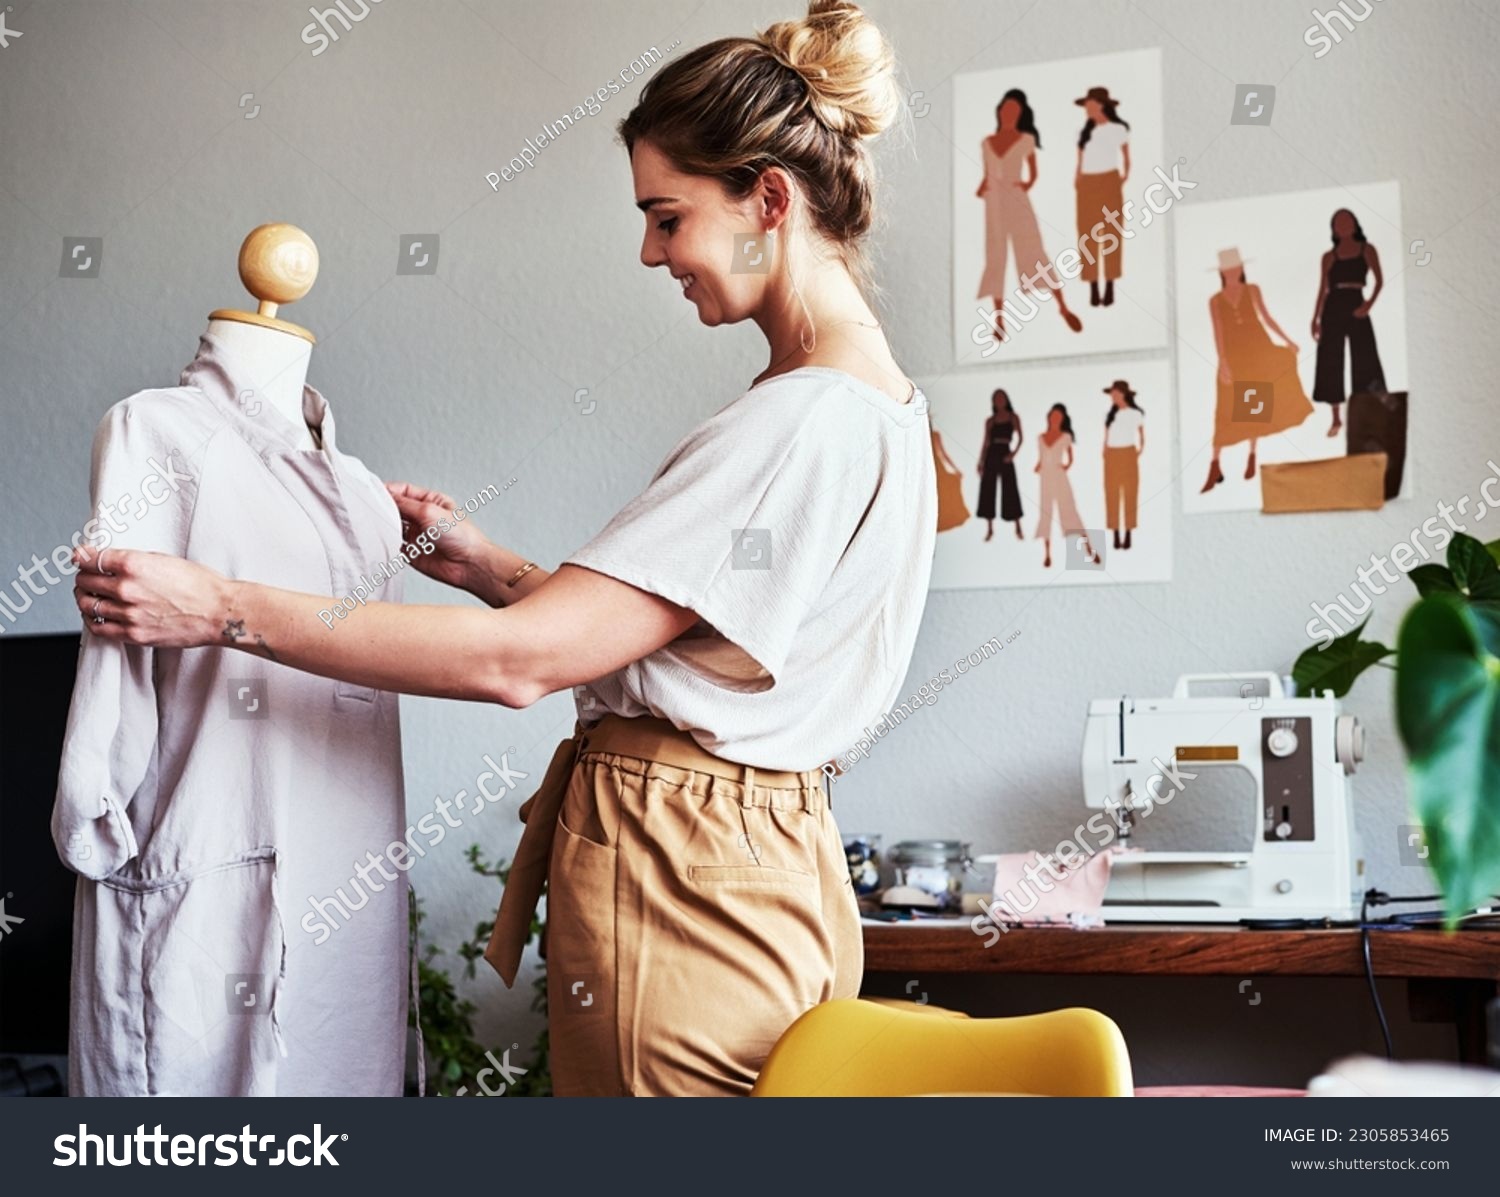 Fashion, happy woman and designer with mannequin, creative small business and smile. Happiness, creativity and tailor in boutique with dress design on doll at textile manufacturing start up studio. #2305853465